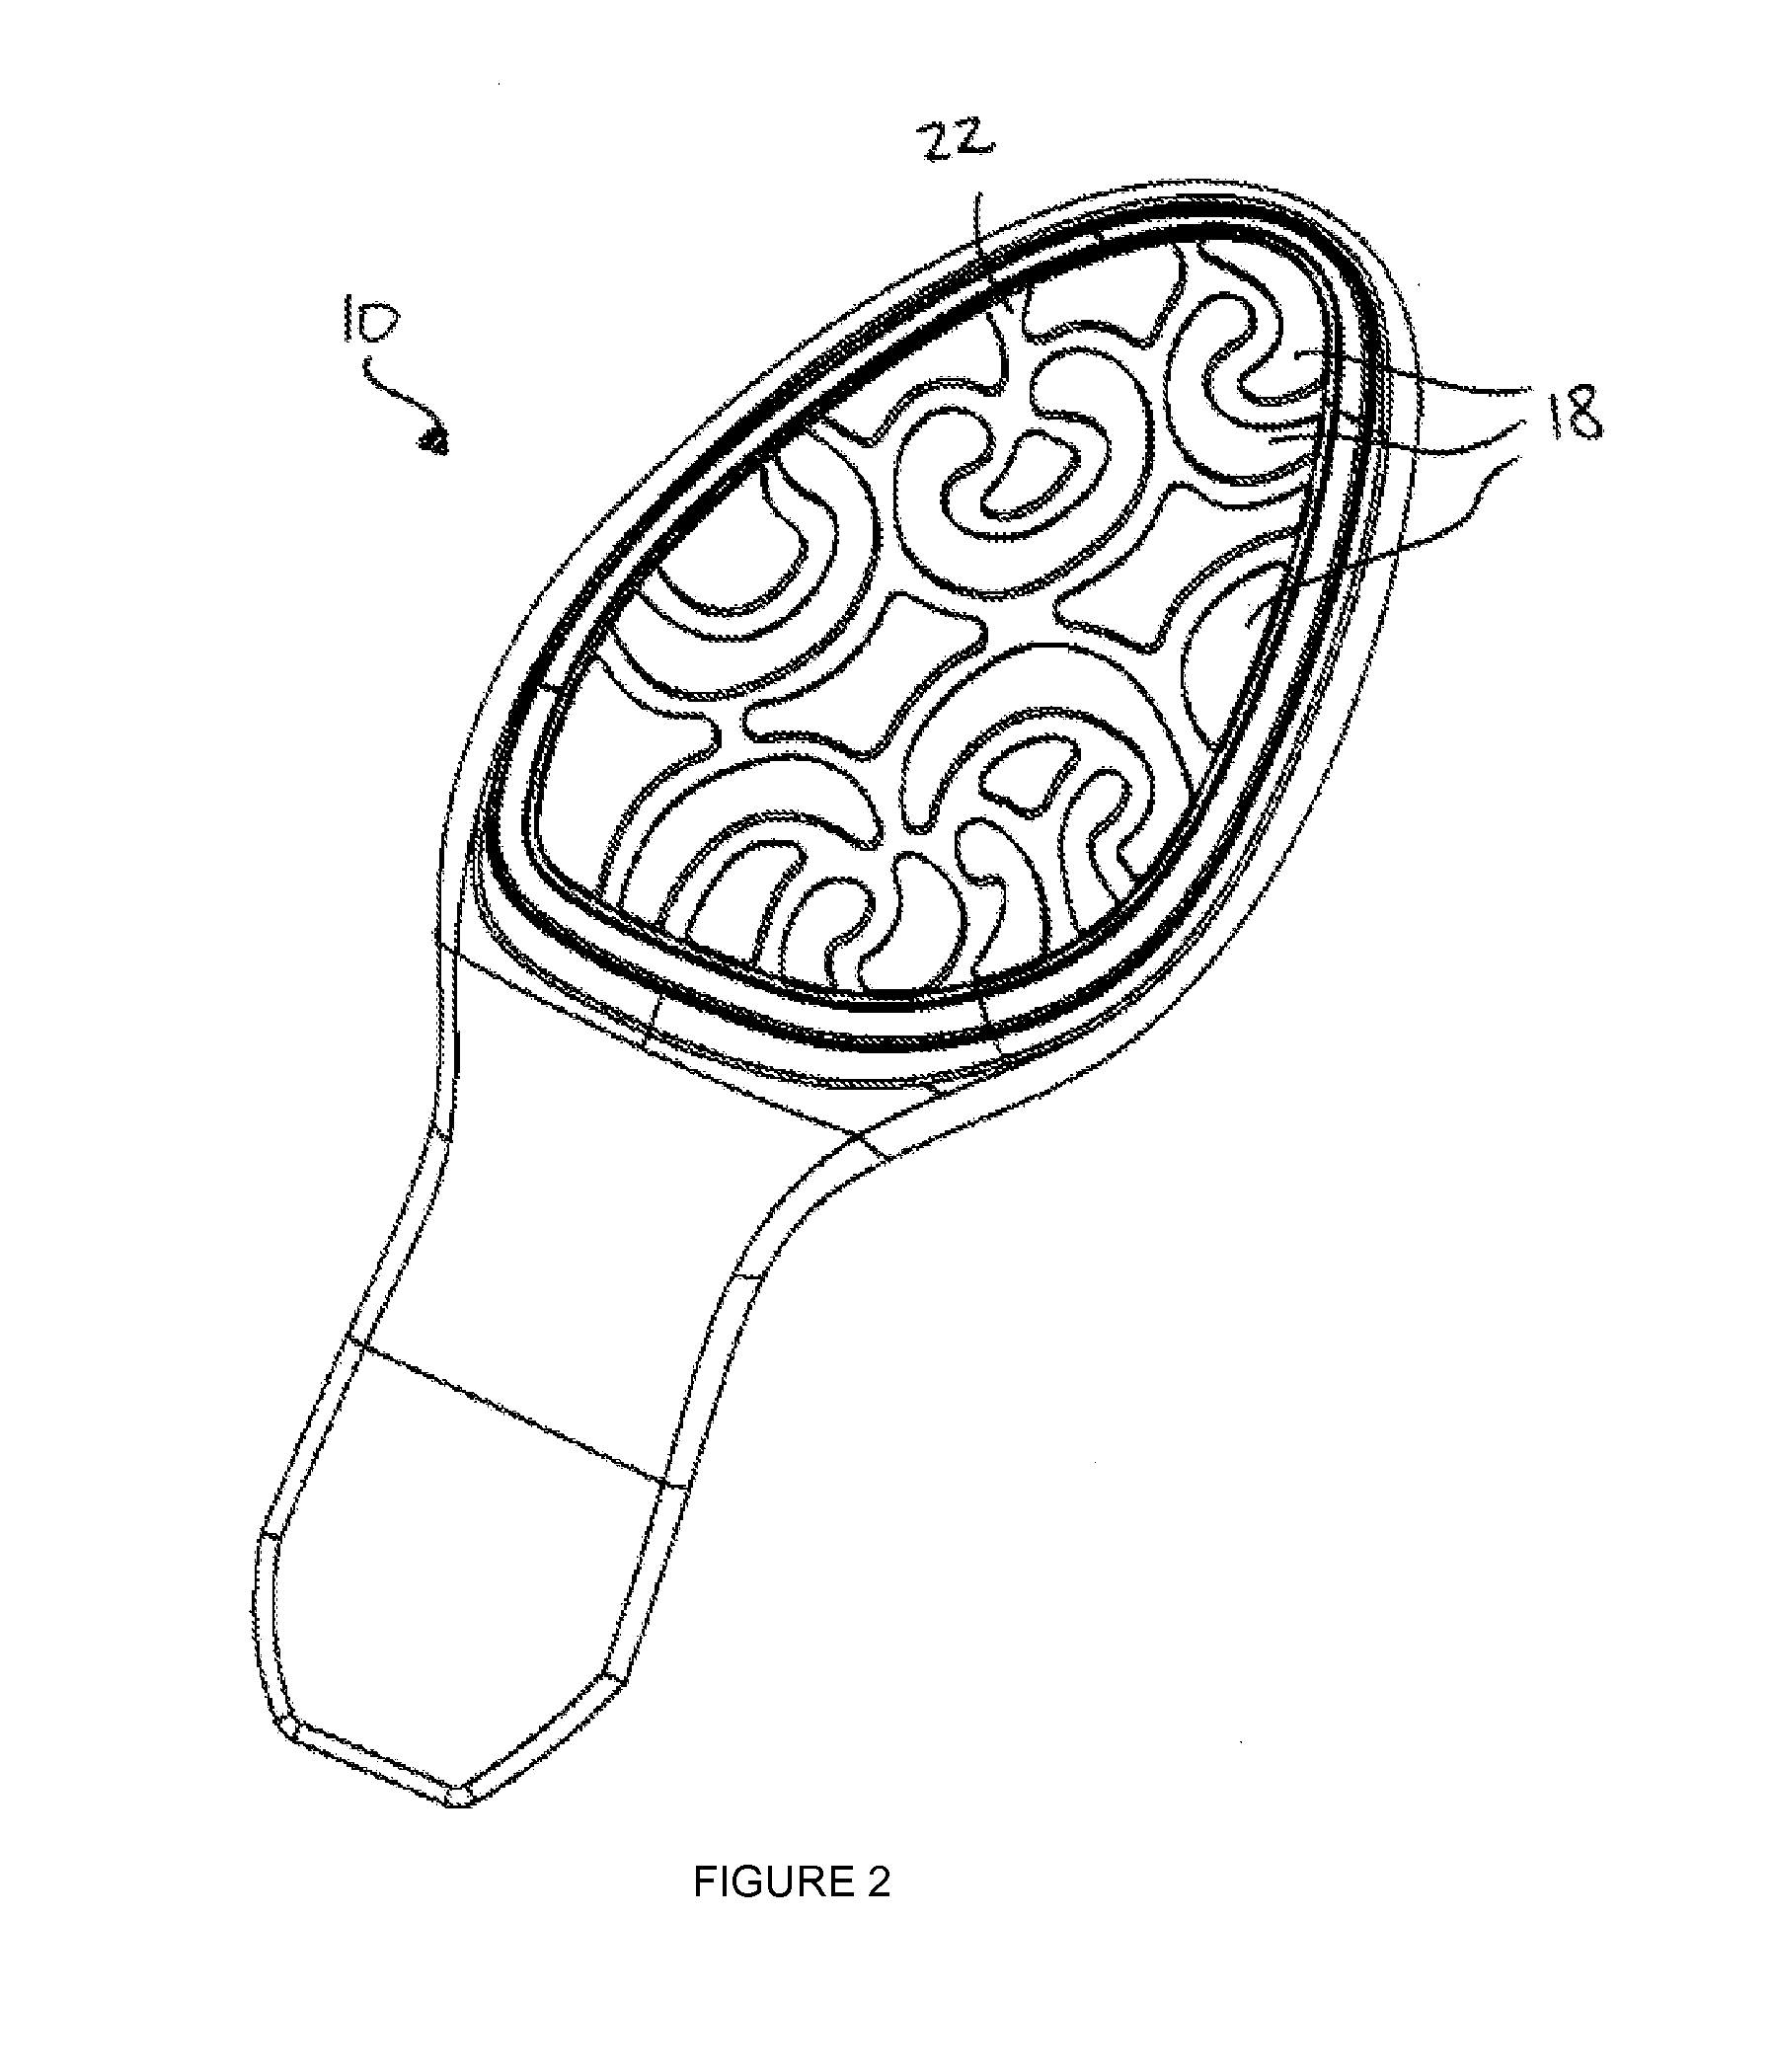 System and method for forming a shoe sole